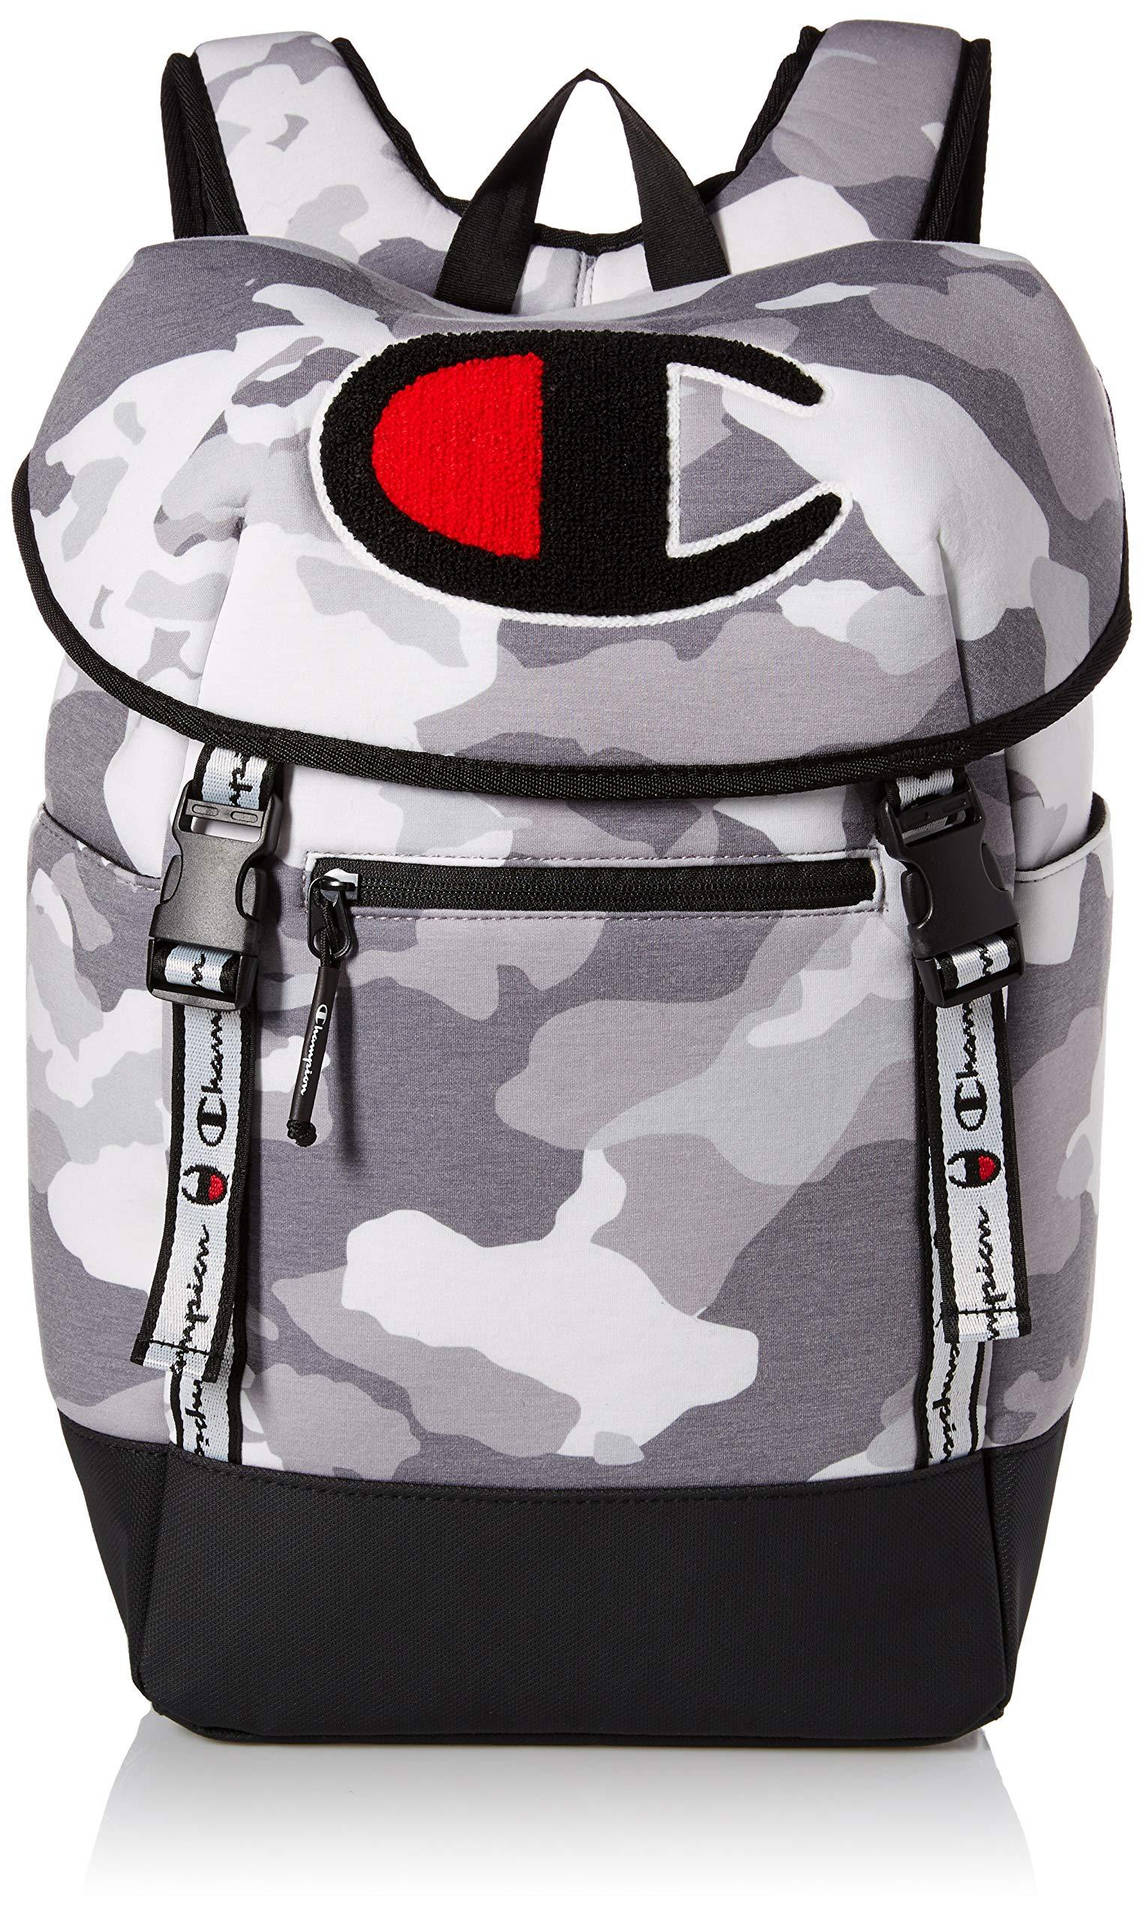 Champion Grey Army Backpack Wallpaper